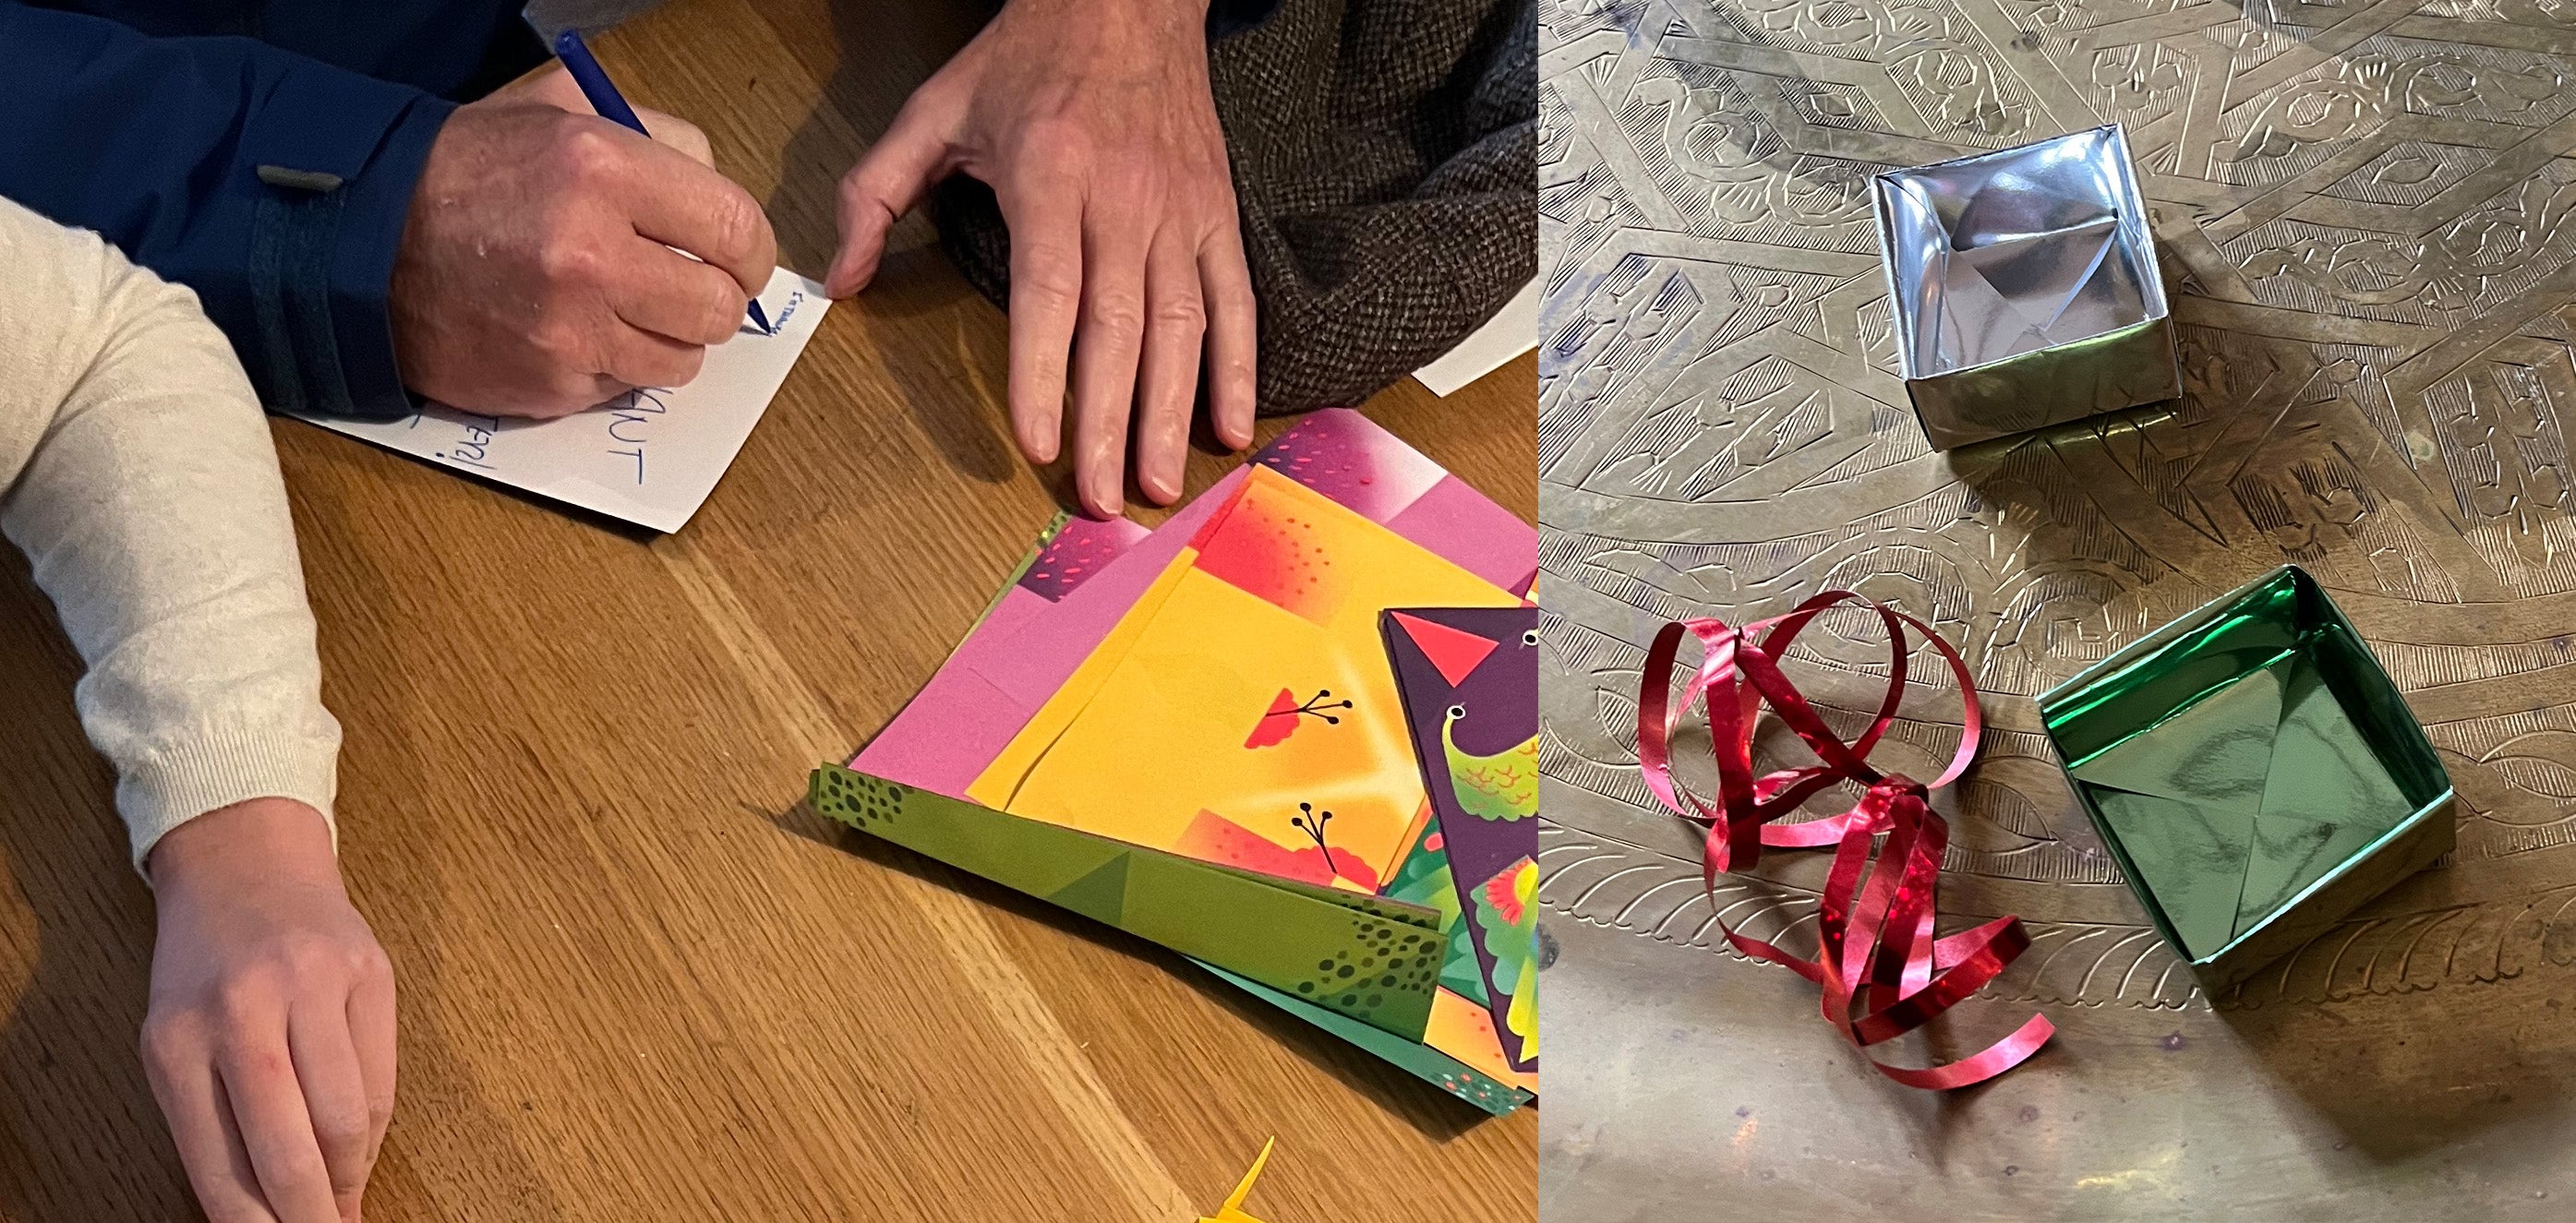 image on left of someone writing on a piece of paper, image on right of an opened silver and green origami box ornament laying on a metal tray